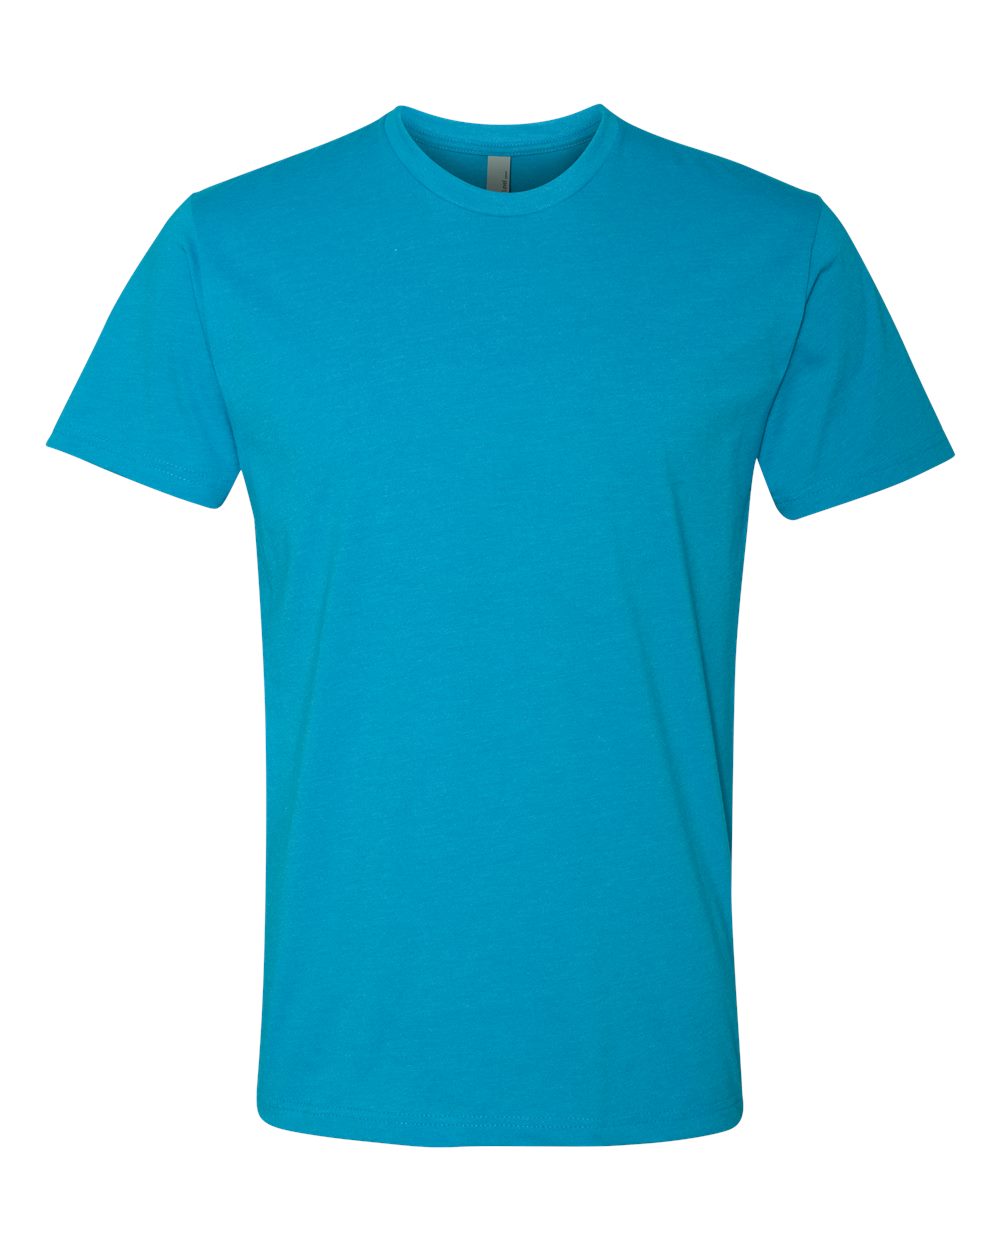 Next Level Cotton Tee (3600) in Turquoise